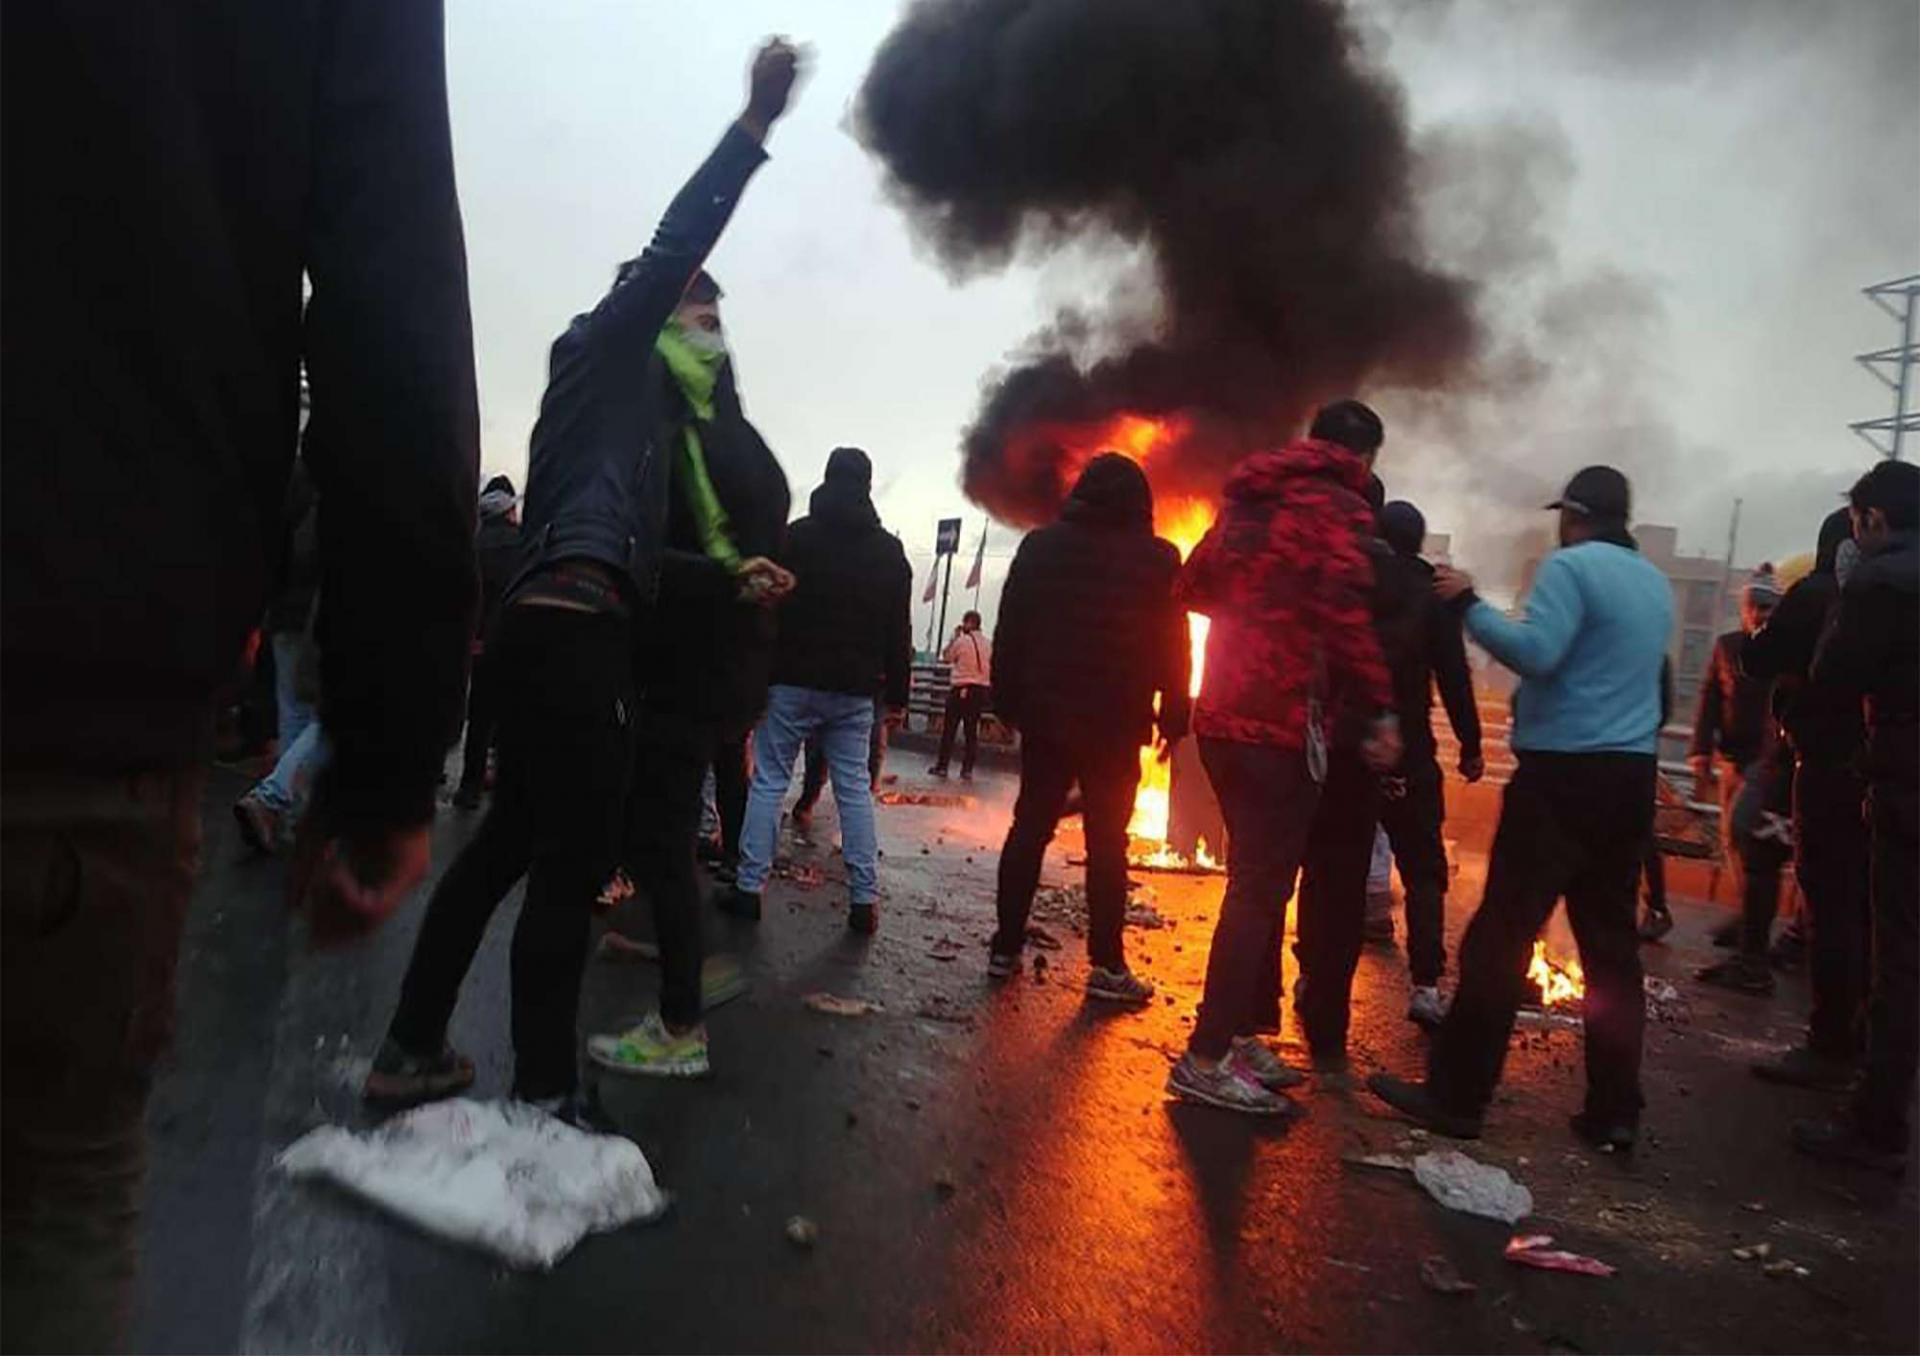 In Tehran protesters were seen blocking a road while elsewhere in the capital demonstrators gathered around a burning vehicle.